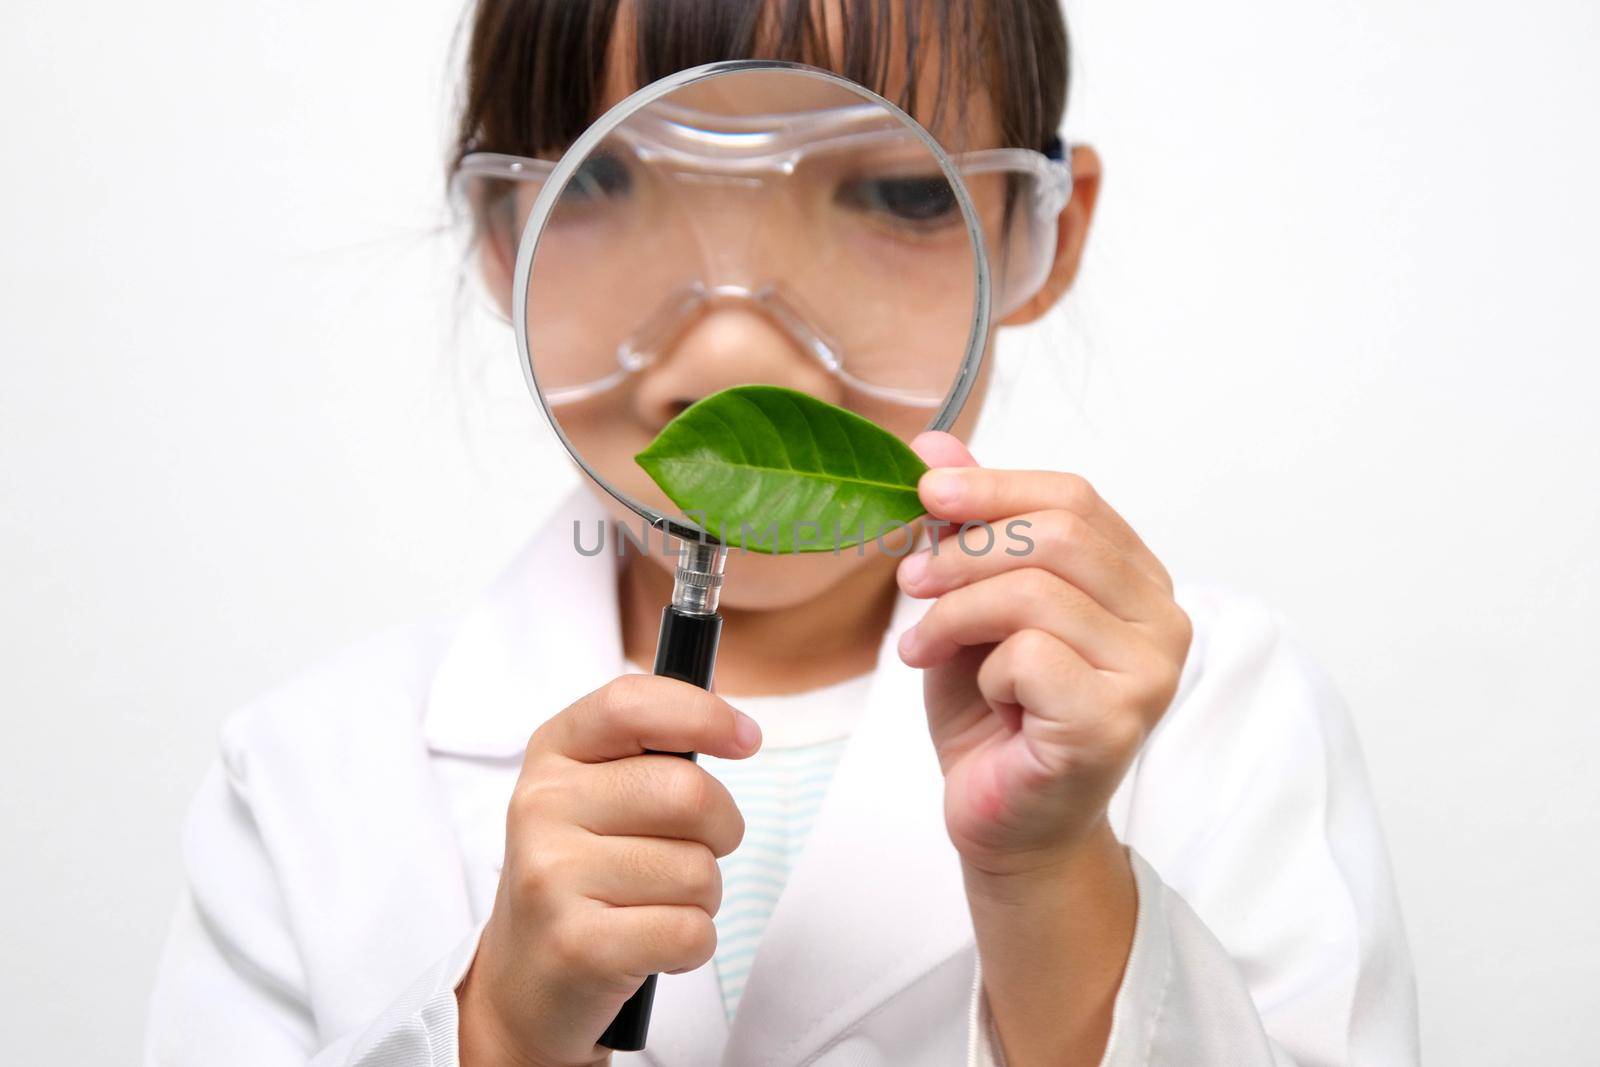 Portrait of a little girl in glasses holding a magnifying glass looking at leaves in researcher or science uniform on white background. Little scientist. by TEERASAK